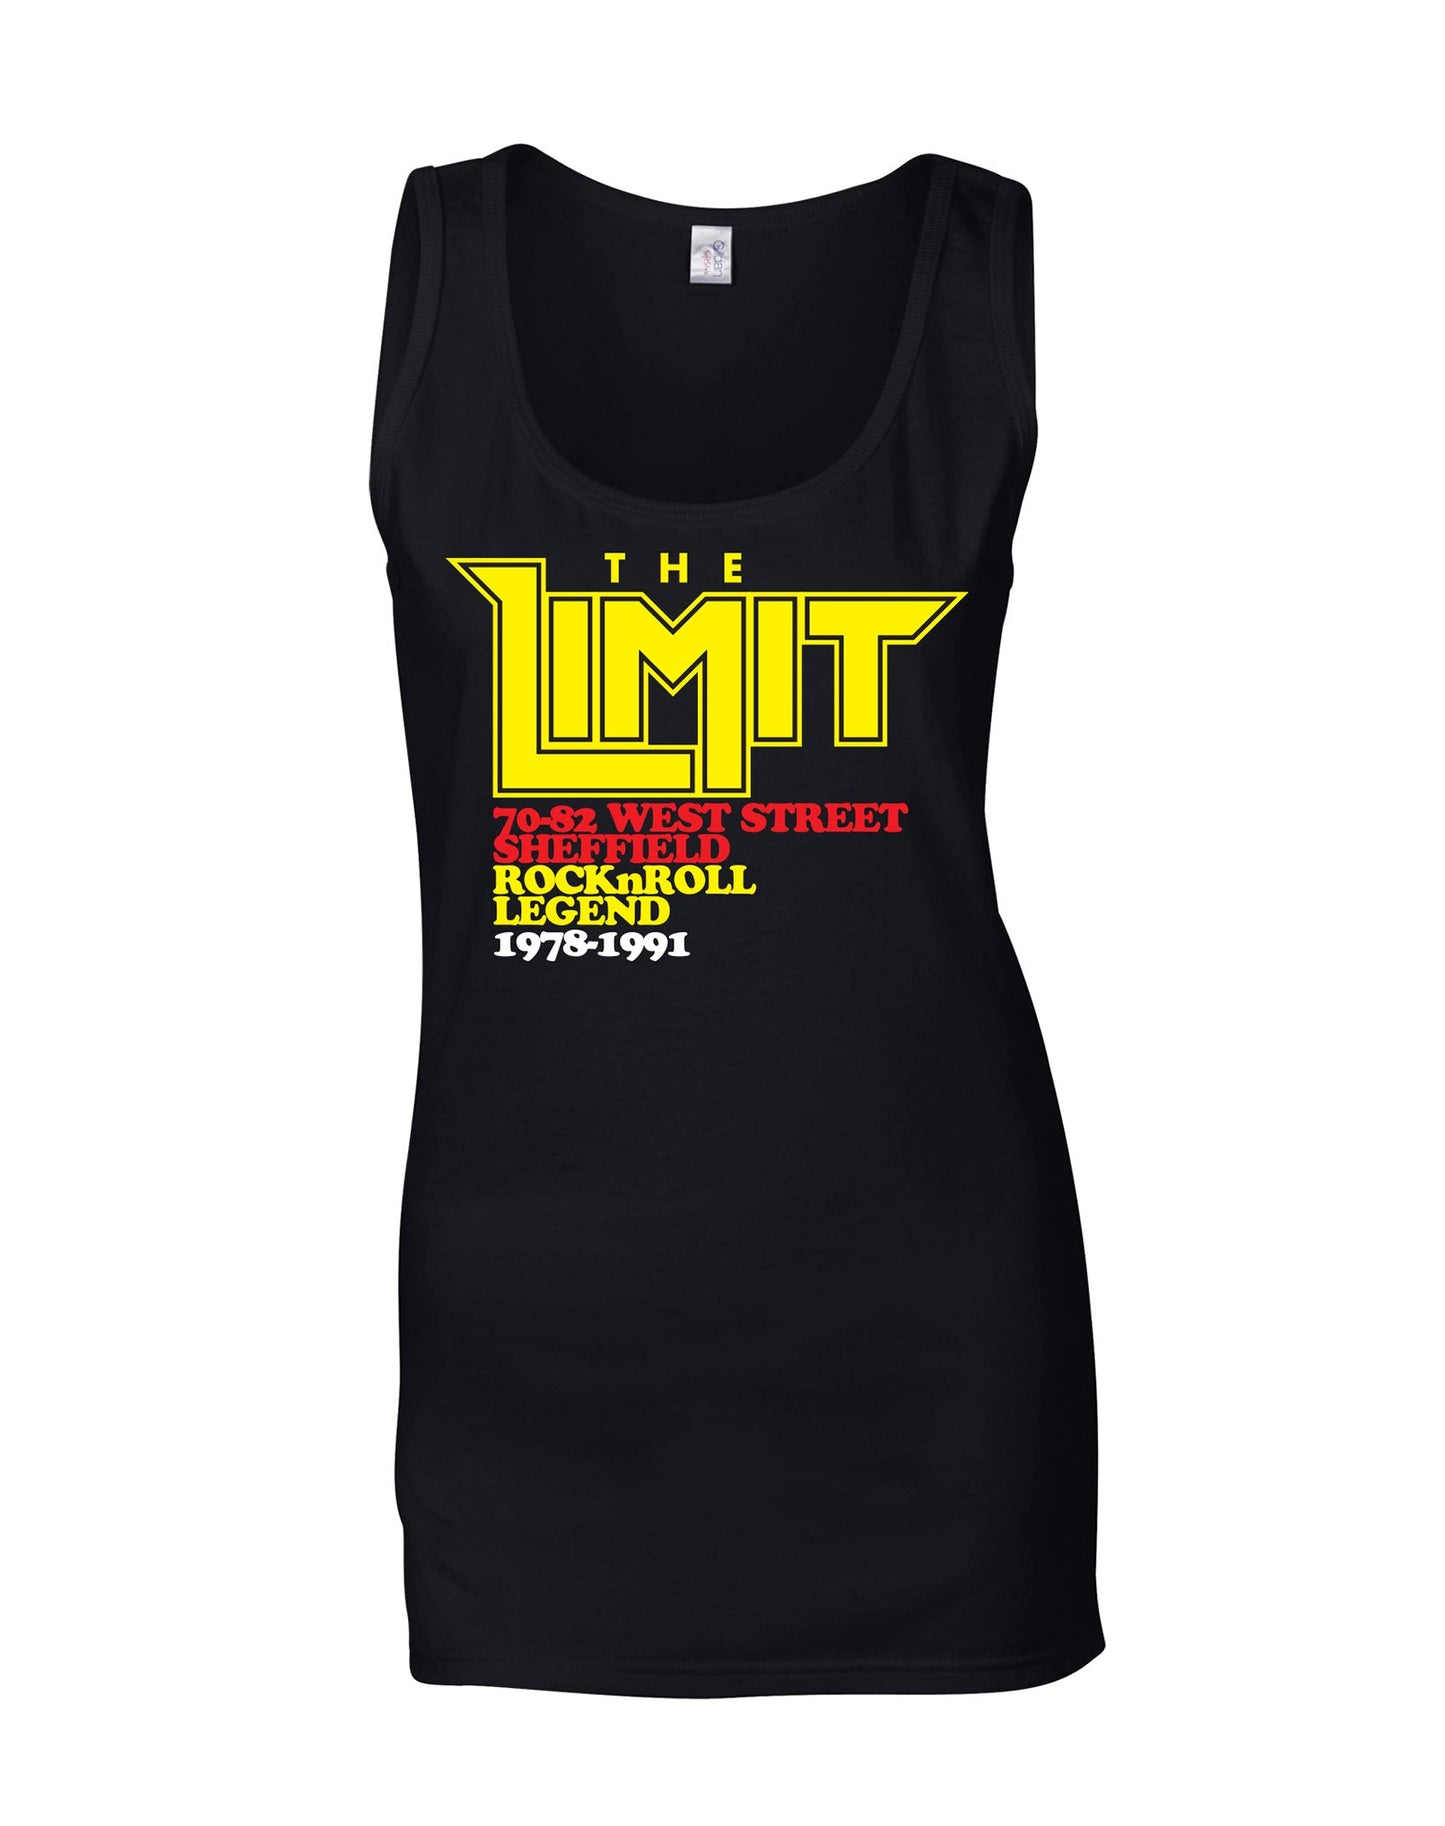 Limit anniversary (yellow logo) ladies fit vest - black - Dirty Stop Outs